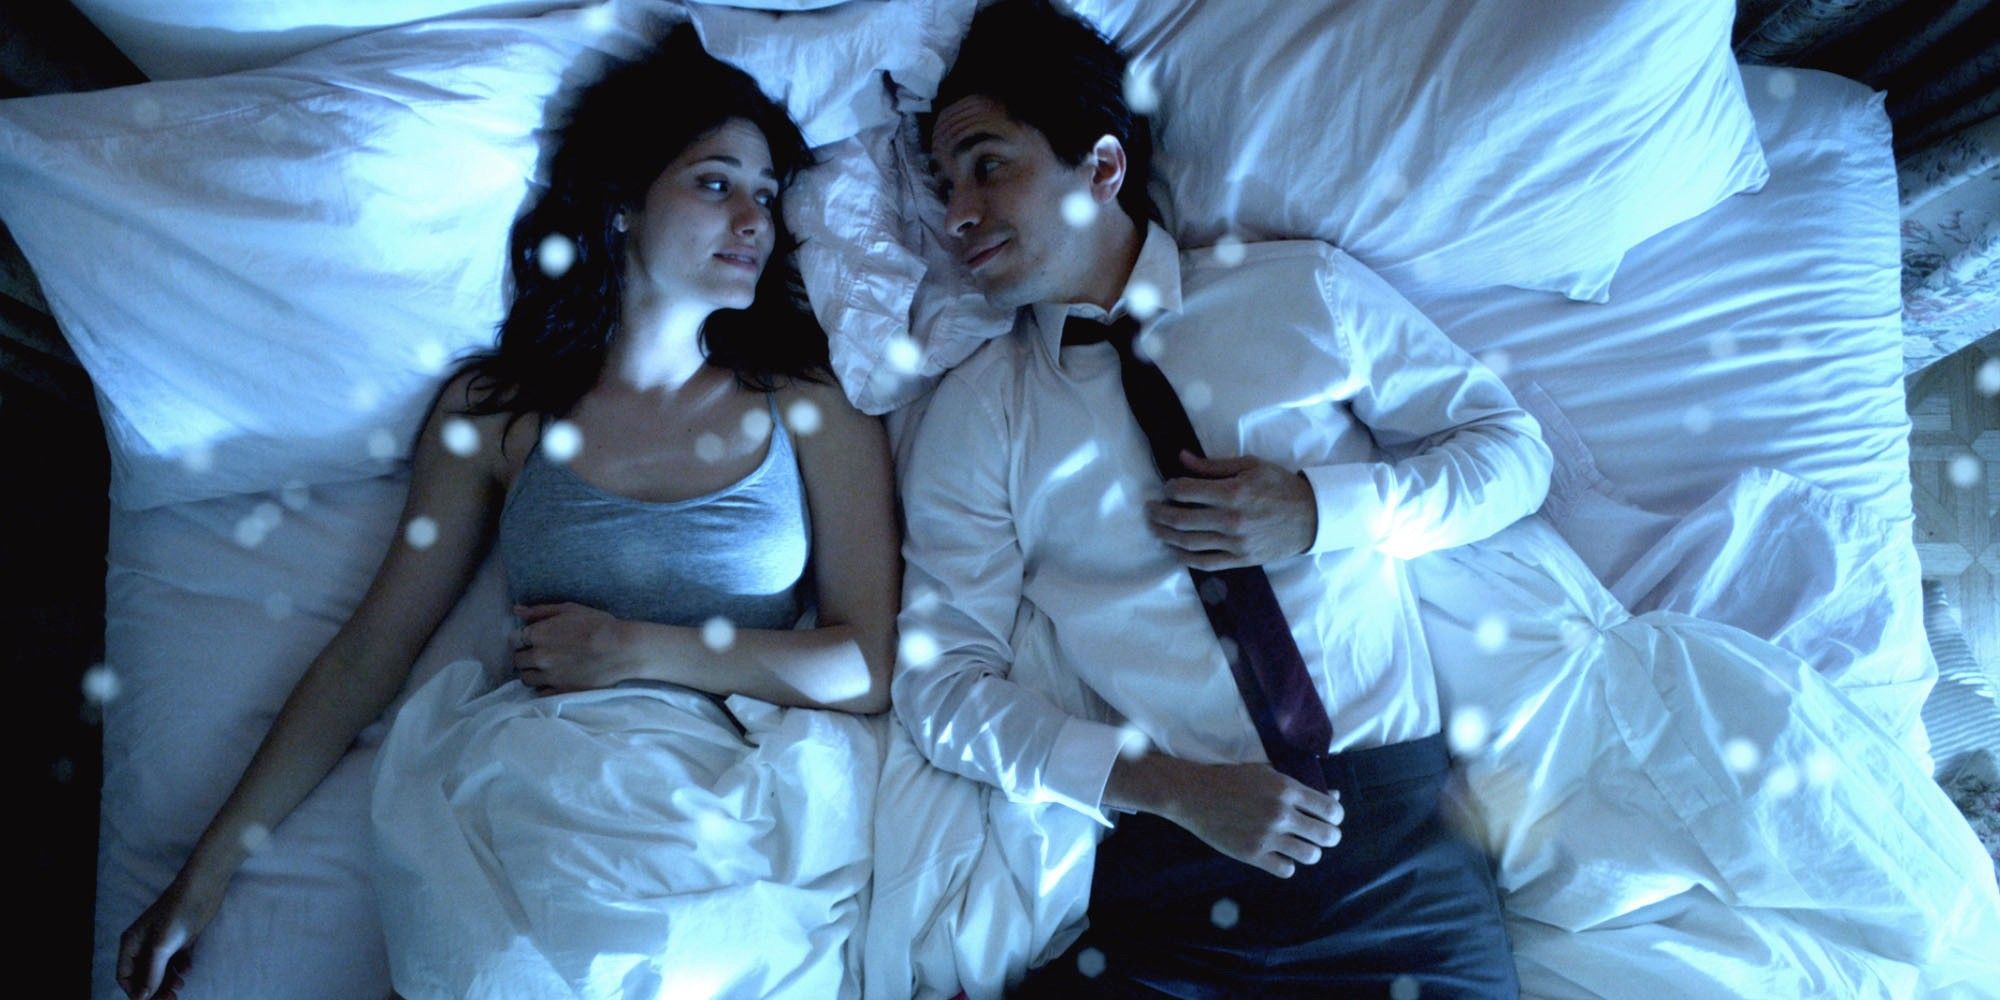 Emmy Rossum and Justin Long in 'Comet'